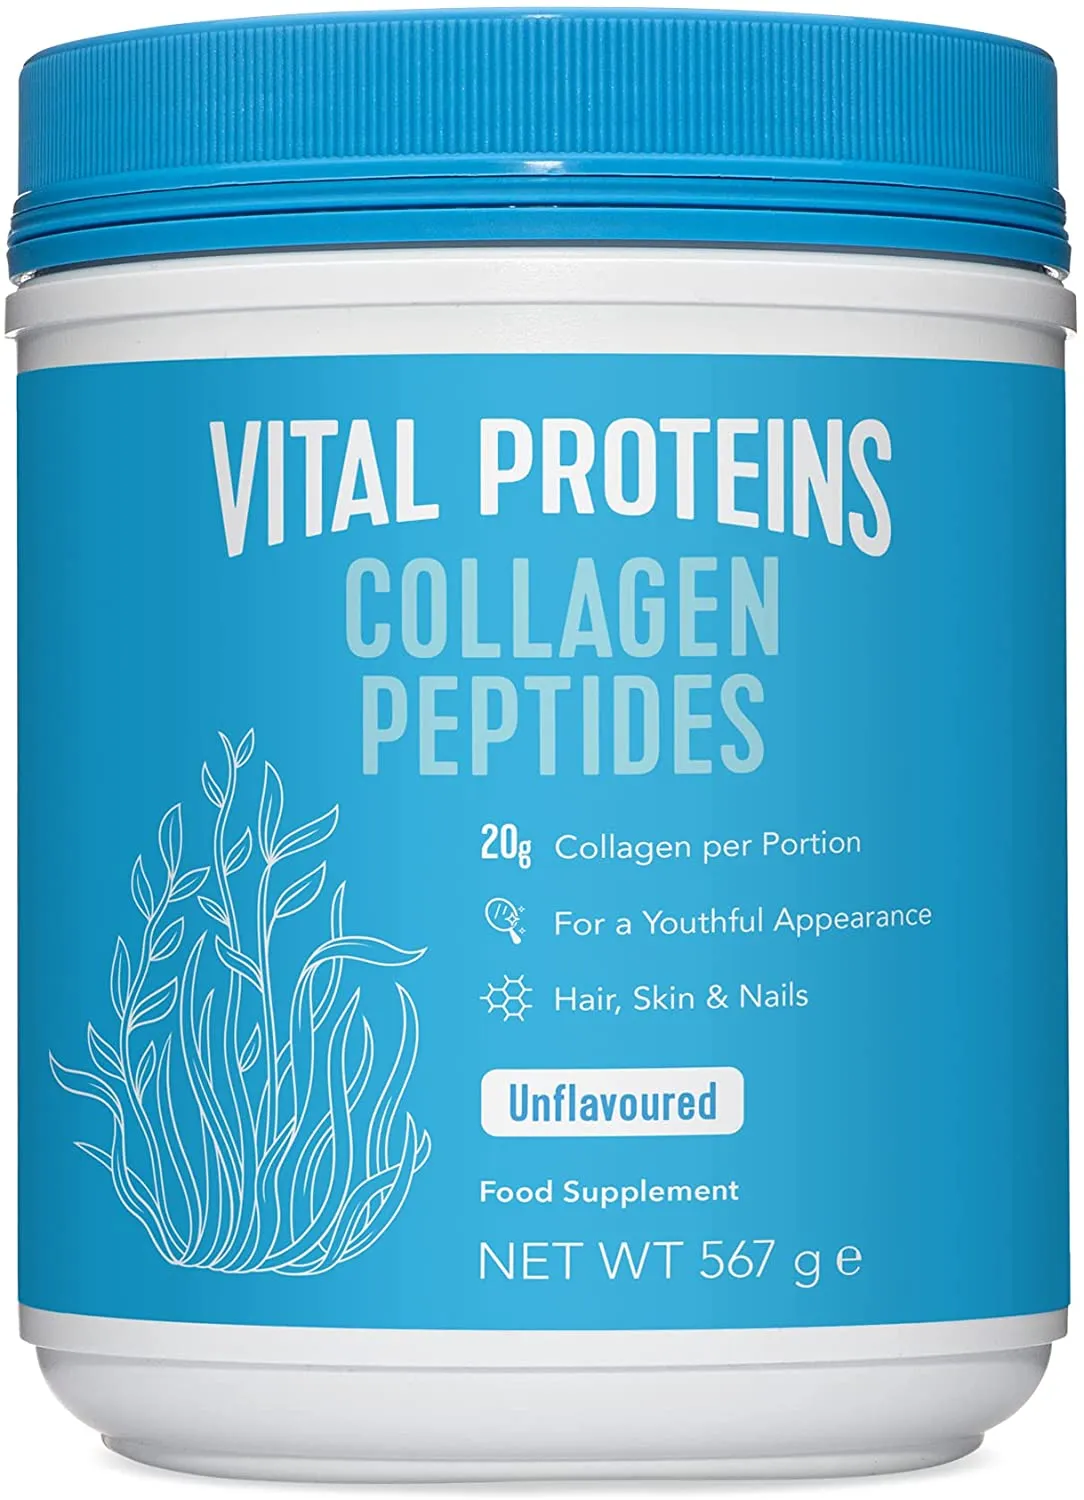 Vital Proteins Collagen Peptides (Hair / Skin / Nails / Joints & Bones)  567G Unflavored - low price, check reviews and dosage